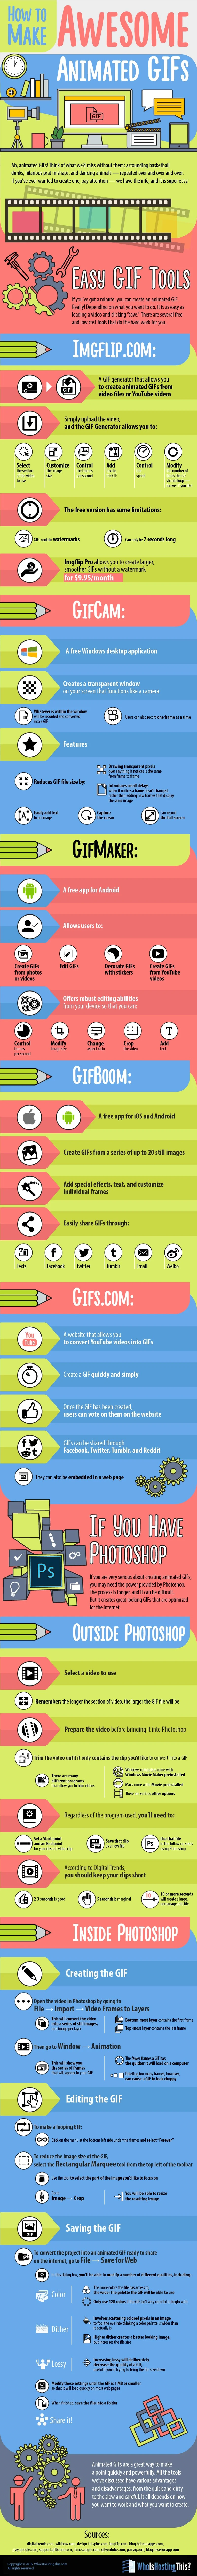 The Easy Way to Make Animated GIFs - #infographic